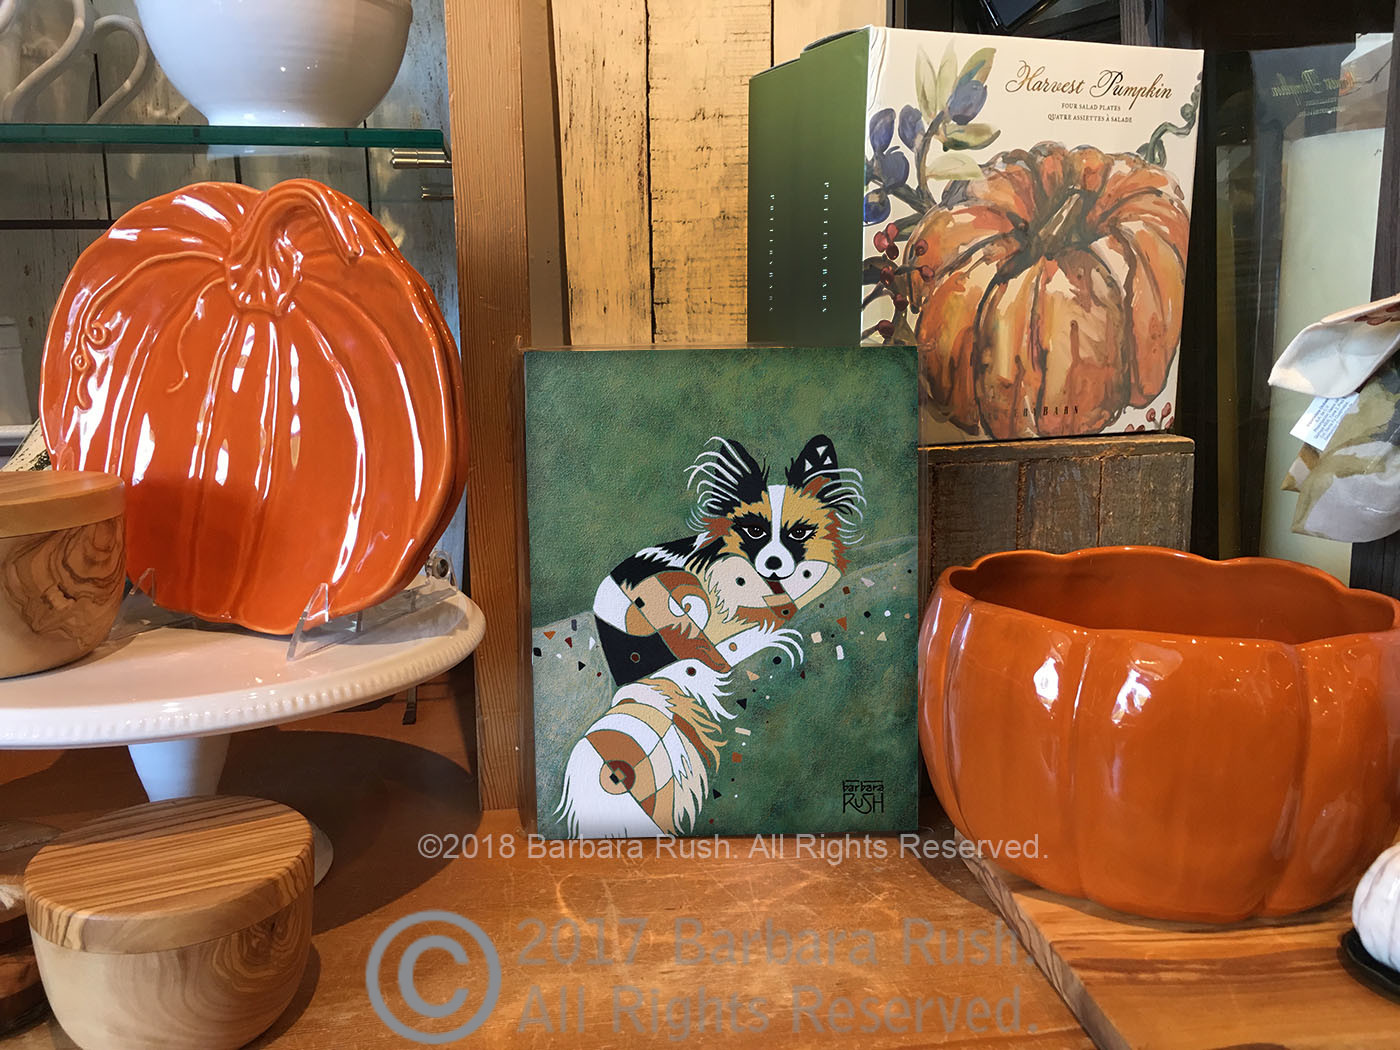 Winking Papillon Butterfly Dog Art Print by A.Lah Photo